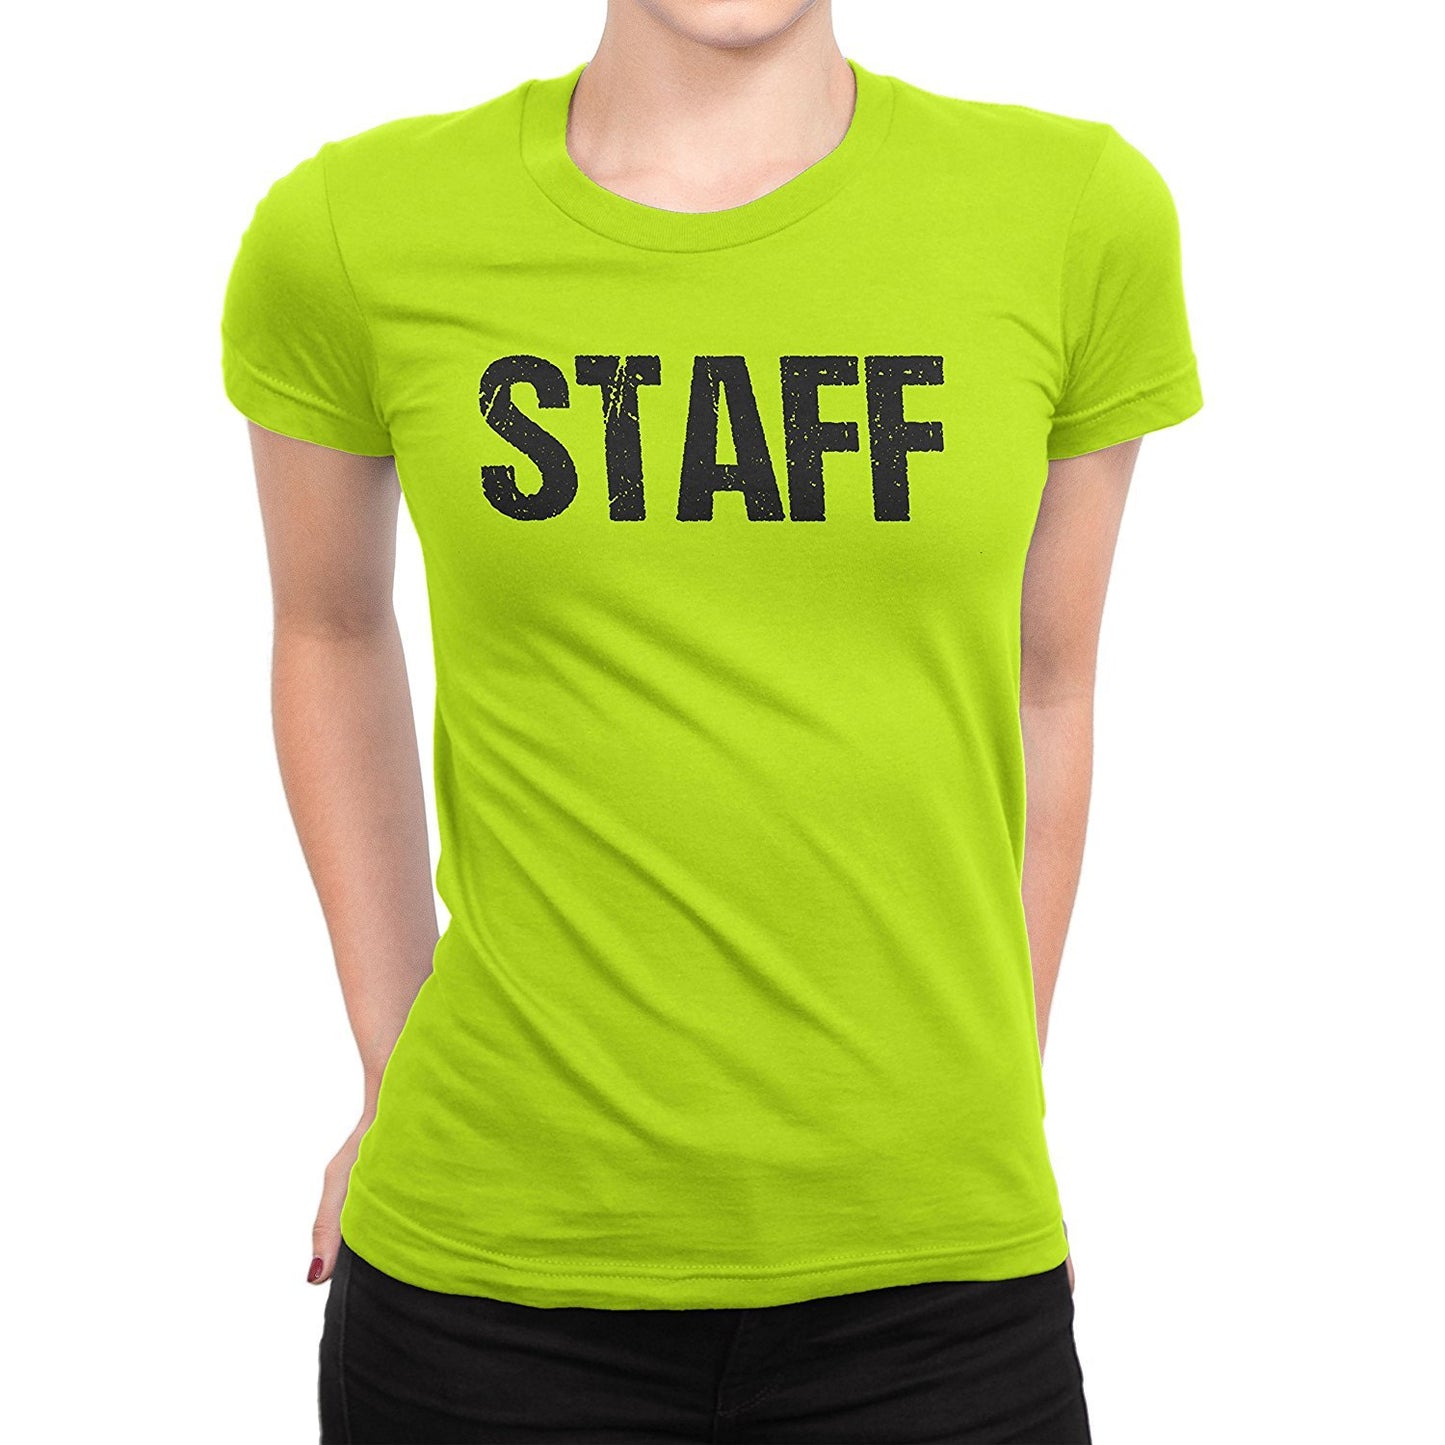 Ladies Neon Yellow Safety Green Staff T-Shirt Front & Back Print Event Shirt Womens Tee